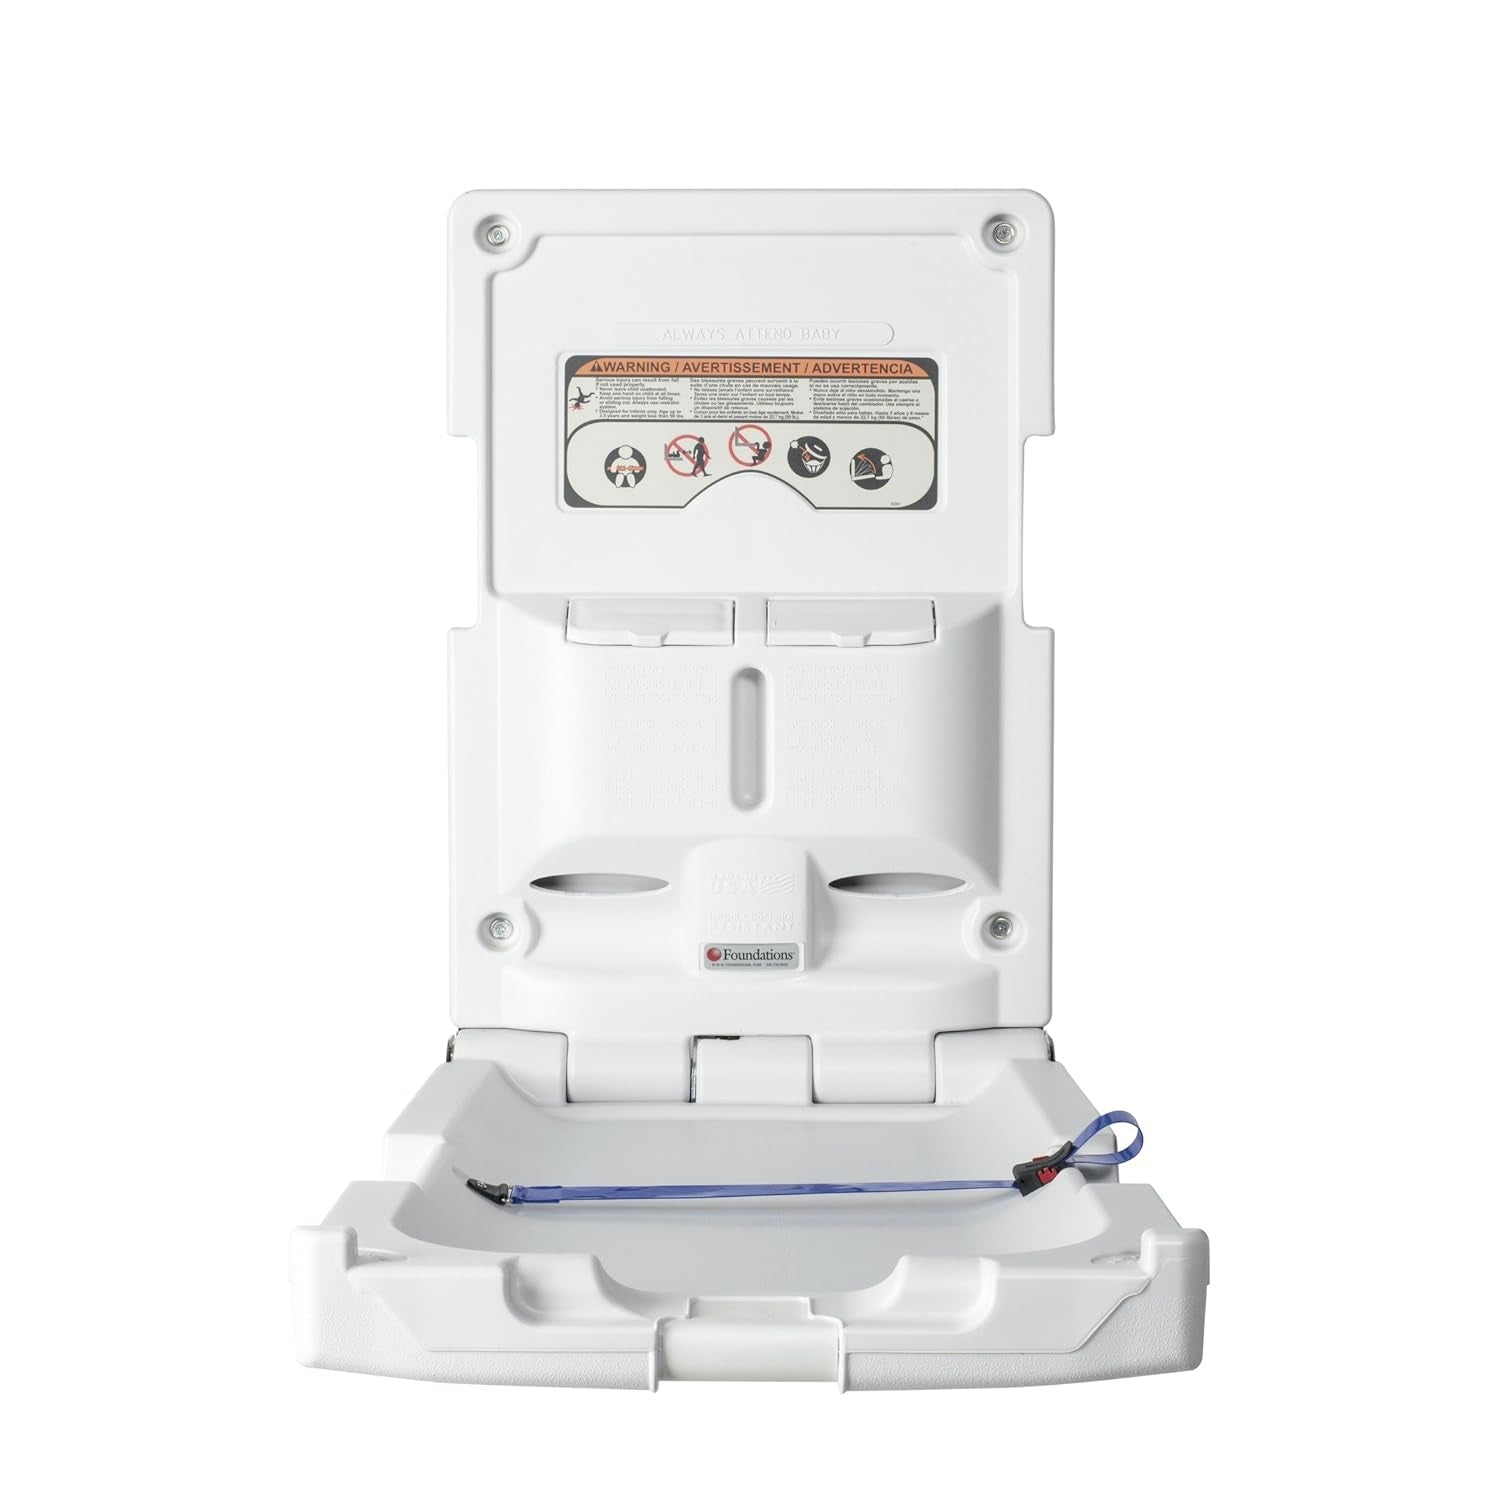 Classic Vertical Baby Changing Station, Surface Mount with Backer-Plate, Light Gray (100-EV-BP)